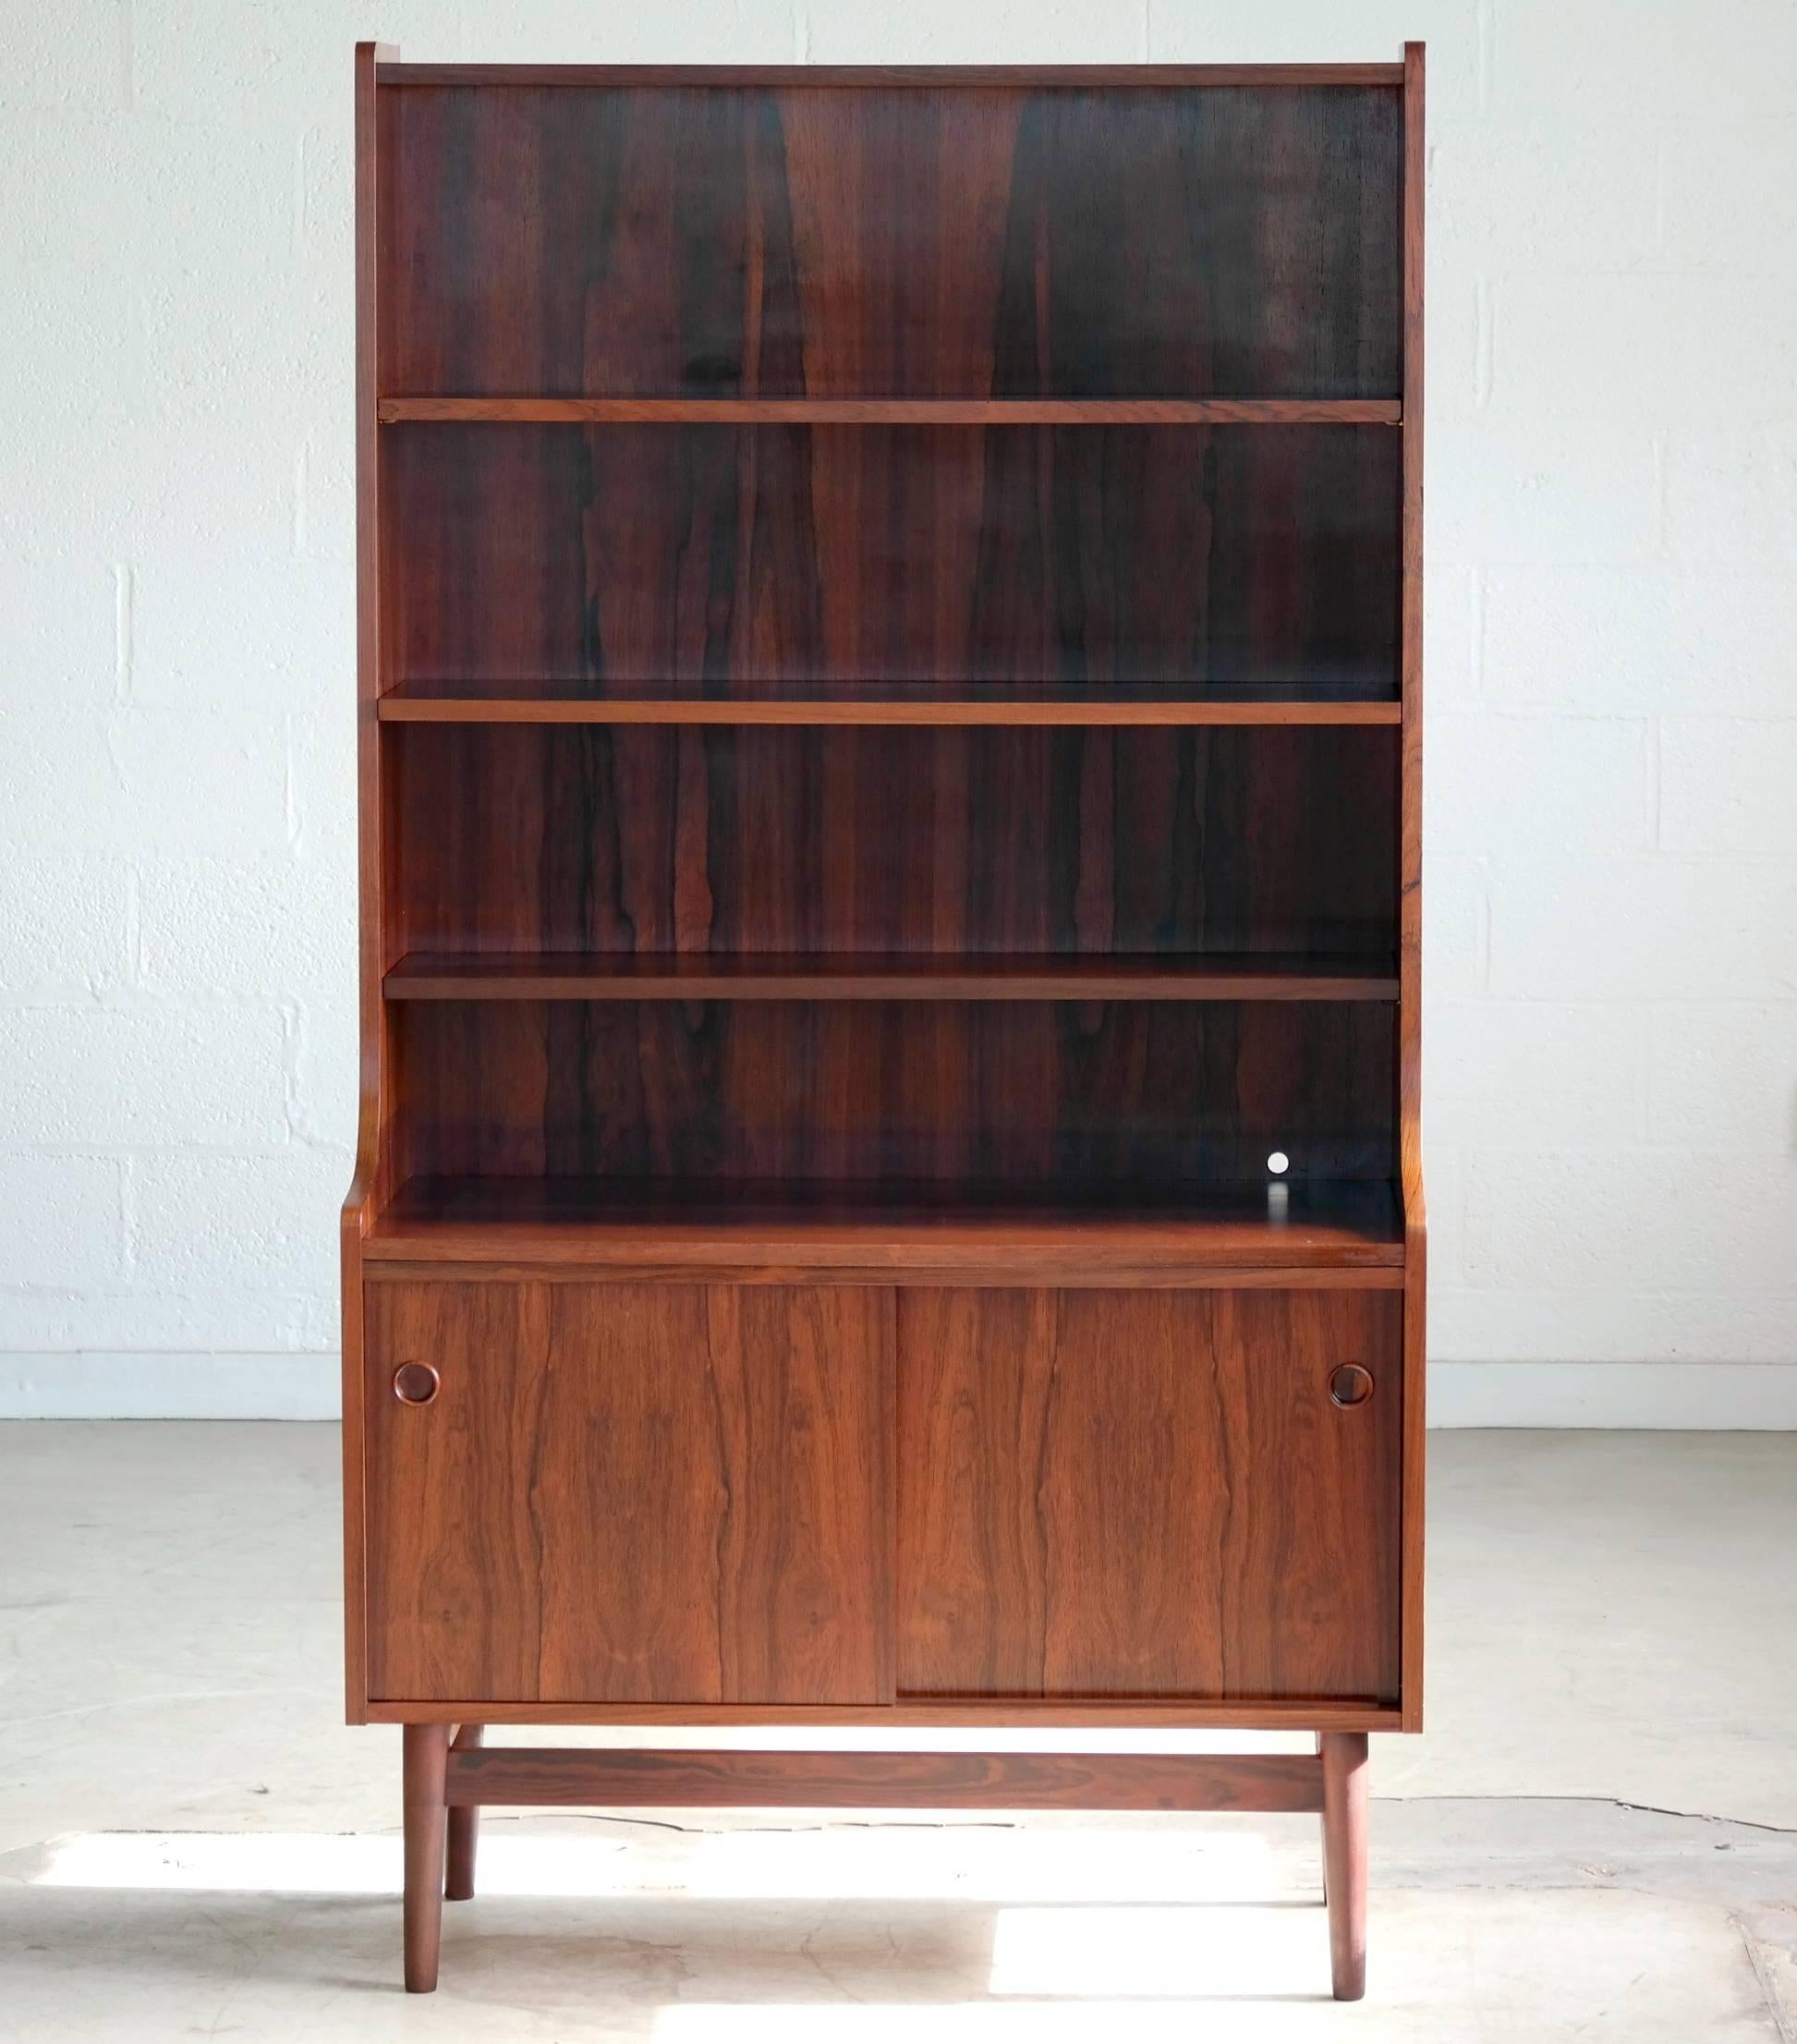 Beautiful rosewood bookcase by Johannes Sorth for Bornholm's Mobler also knows as Nexoe Teak. Very useful with adjustable shelves and two storage cabinets underneath. These bookcases are becoming increasingly sought after as Mr. Sorth's designs keep